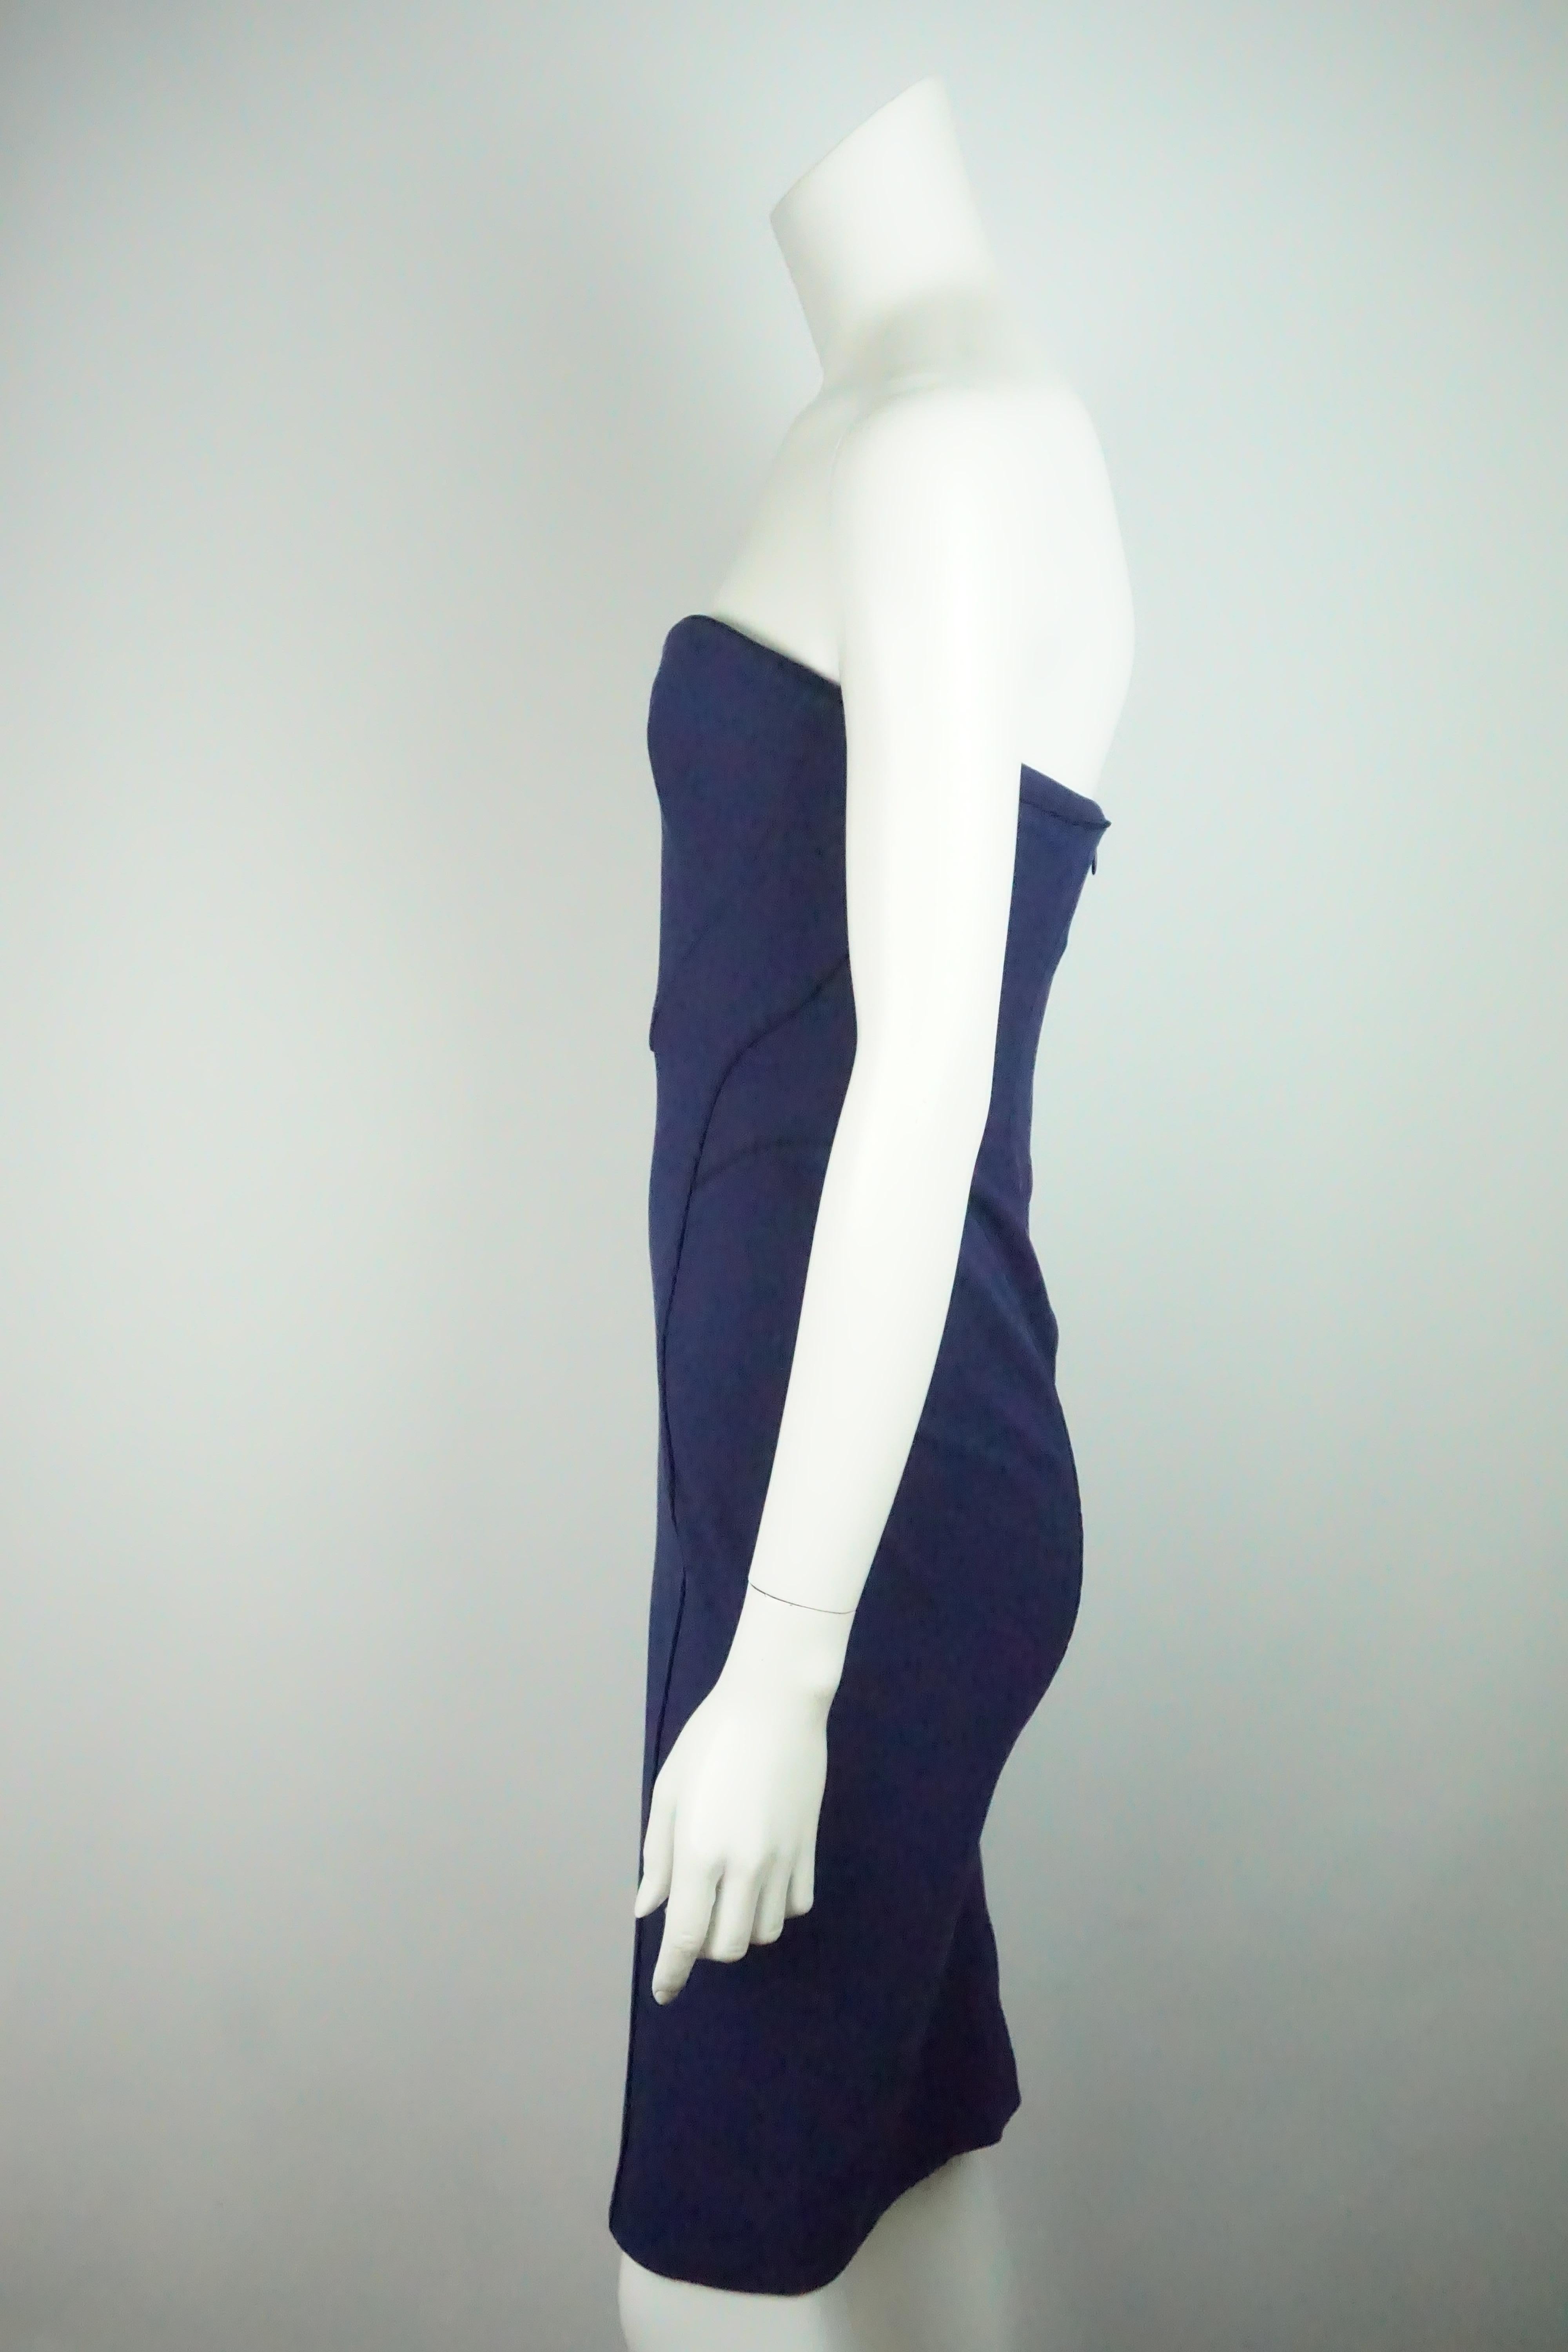 Zac Posen Navy Strapless Bodycon Dress w/ Navy Lining - 4 - NWT   This beautiful dress is new with tags. It is made out of Cotton, Nylon, and Elastic. The dress has a sewn in corset with breast padding. The corset ends right where the stomach